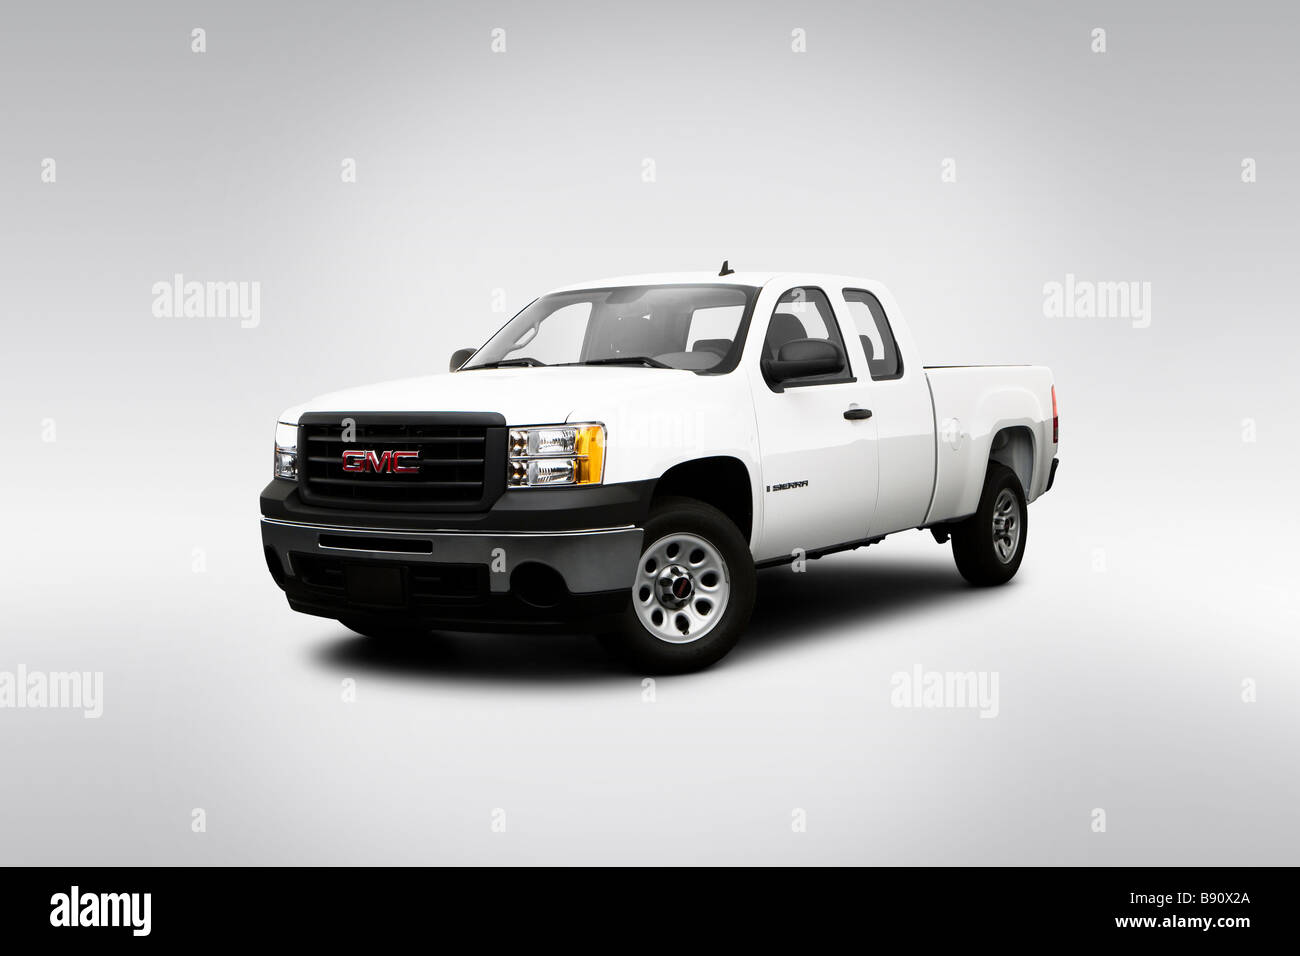 2009 GMC Sierra in White - Front angle view Stock Photo